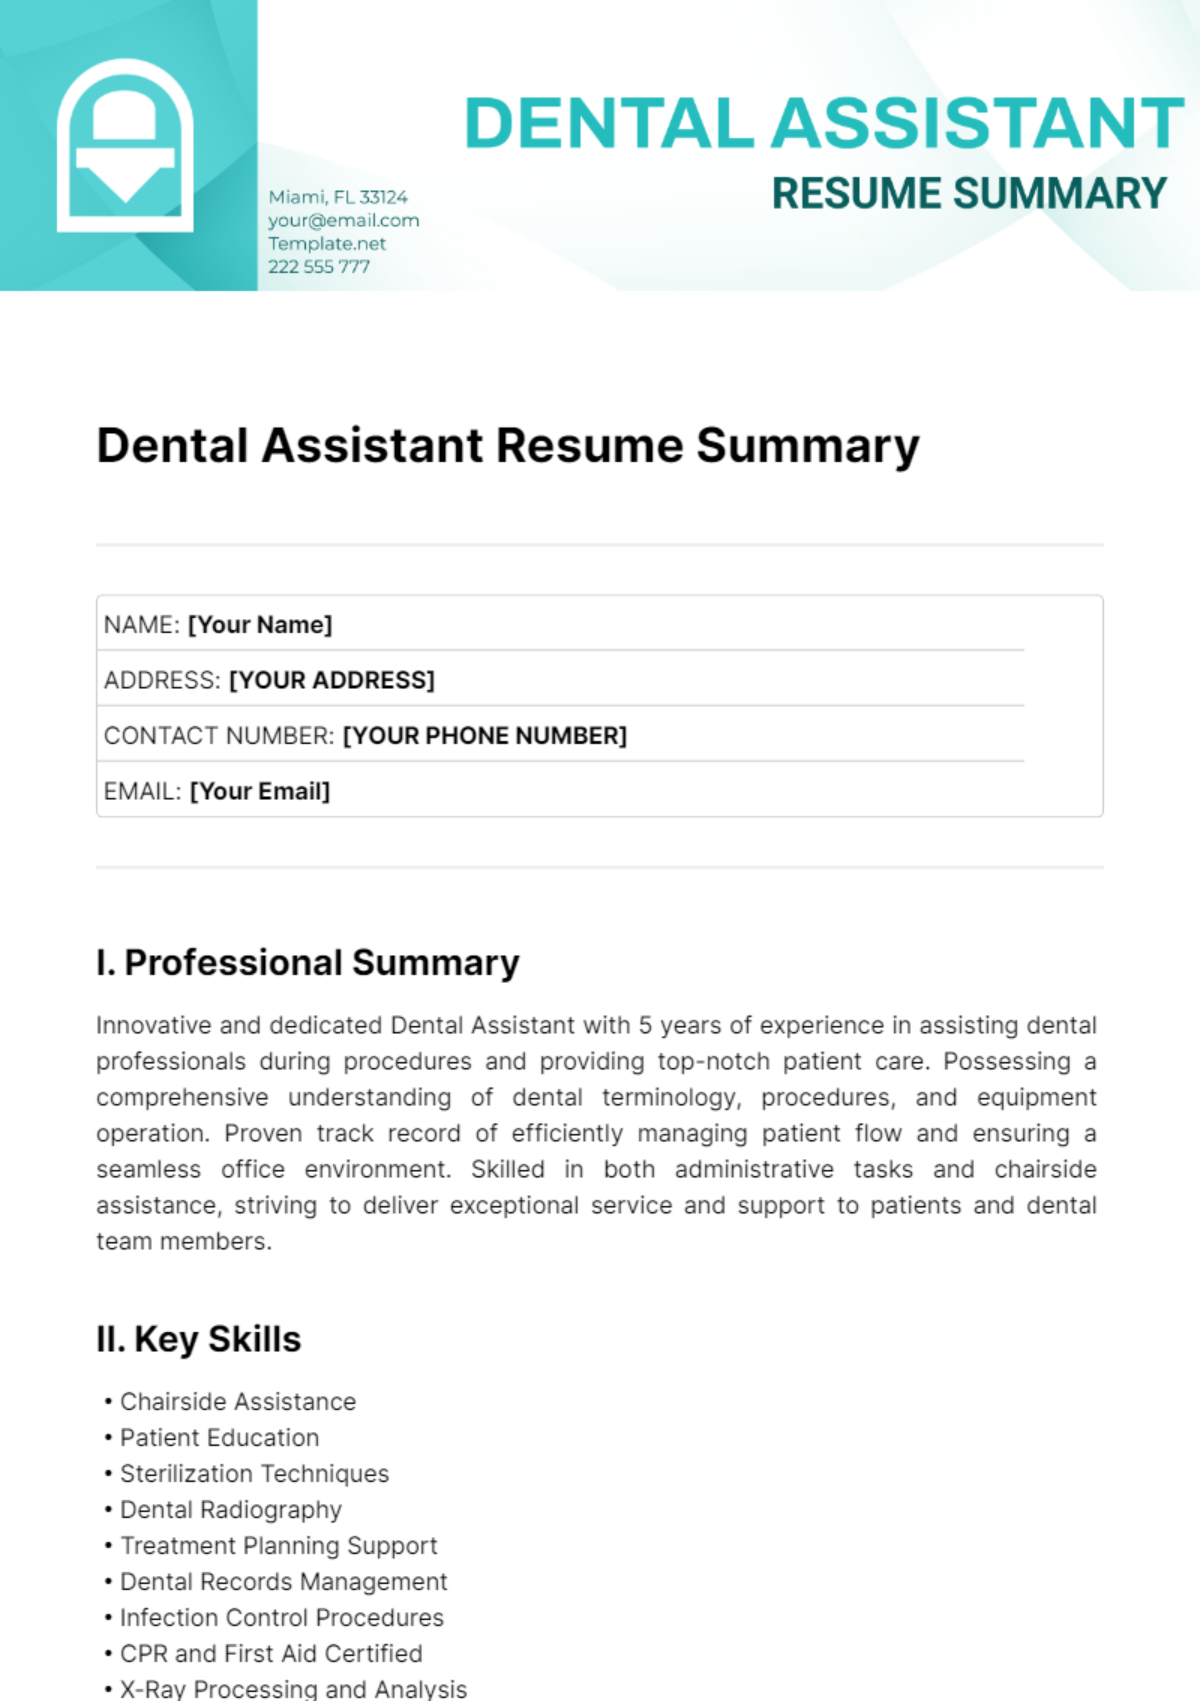 Dental Assistant Resume Summary Template